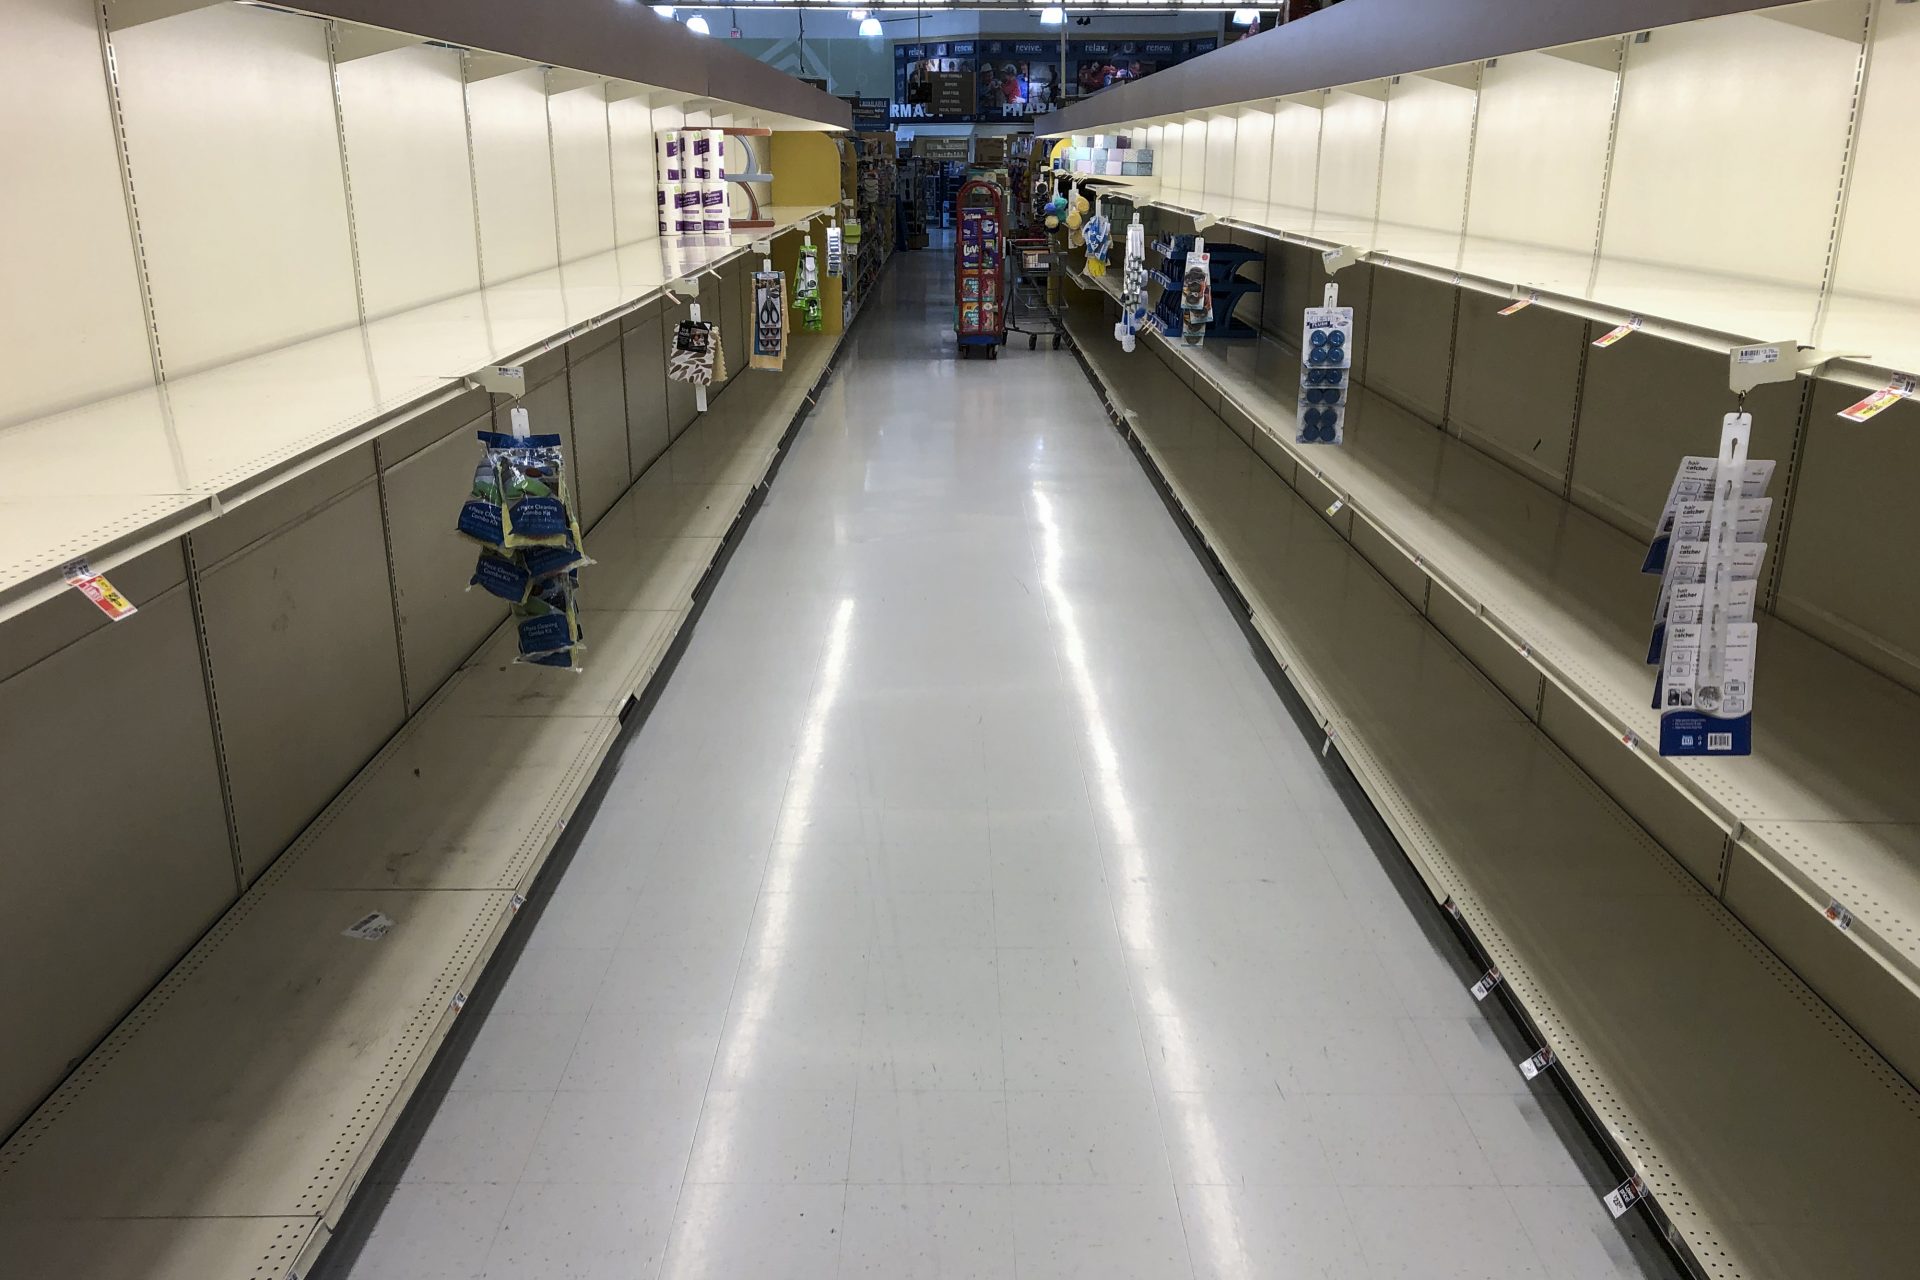 This Monday, March 16, 2020 photo shows empty shelves at a grocery store in Willow Grove, Pa., Shoppers have been buying up extra quantities of the products since the outbreak of the coronavirus. According to the World Health Organization, most people recover in about two to six weeks, depending on the severity of the illness.